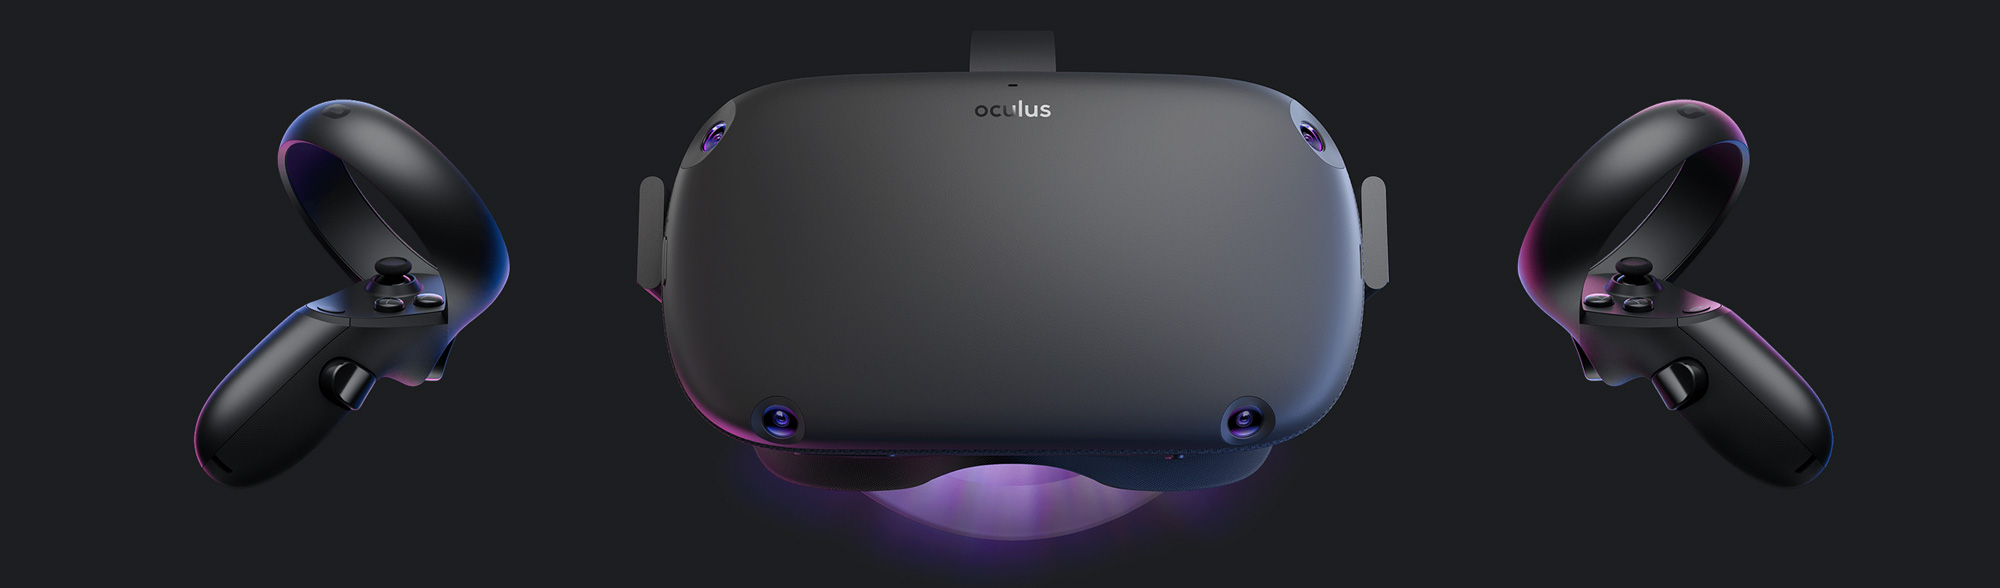 oculus quest experience